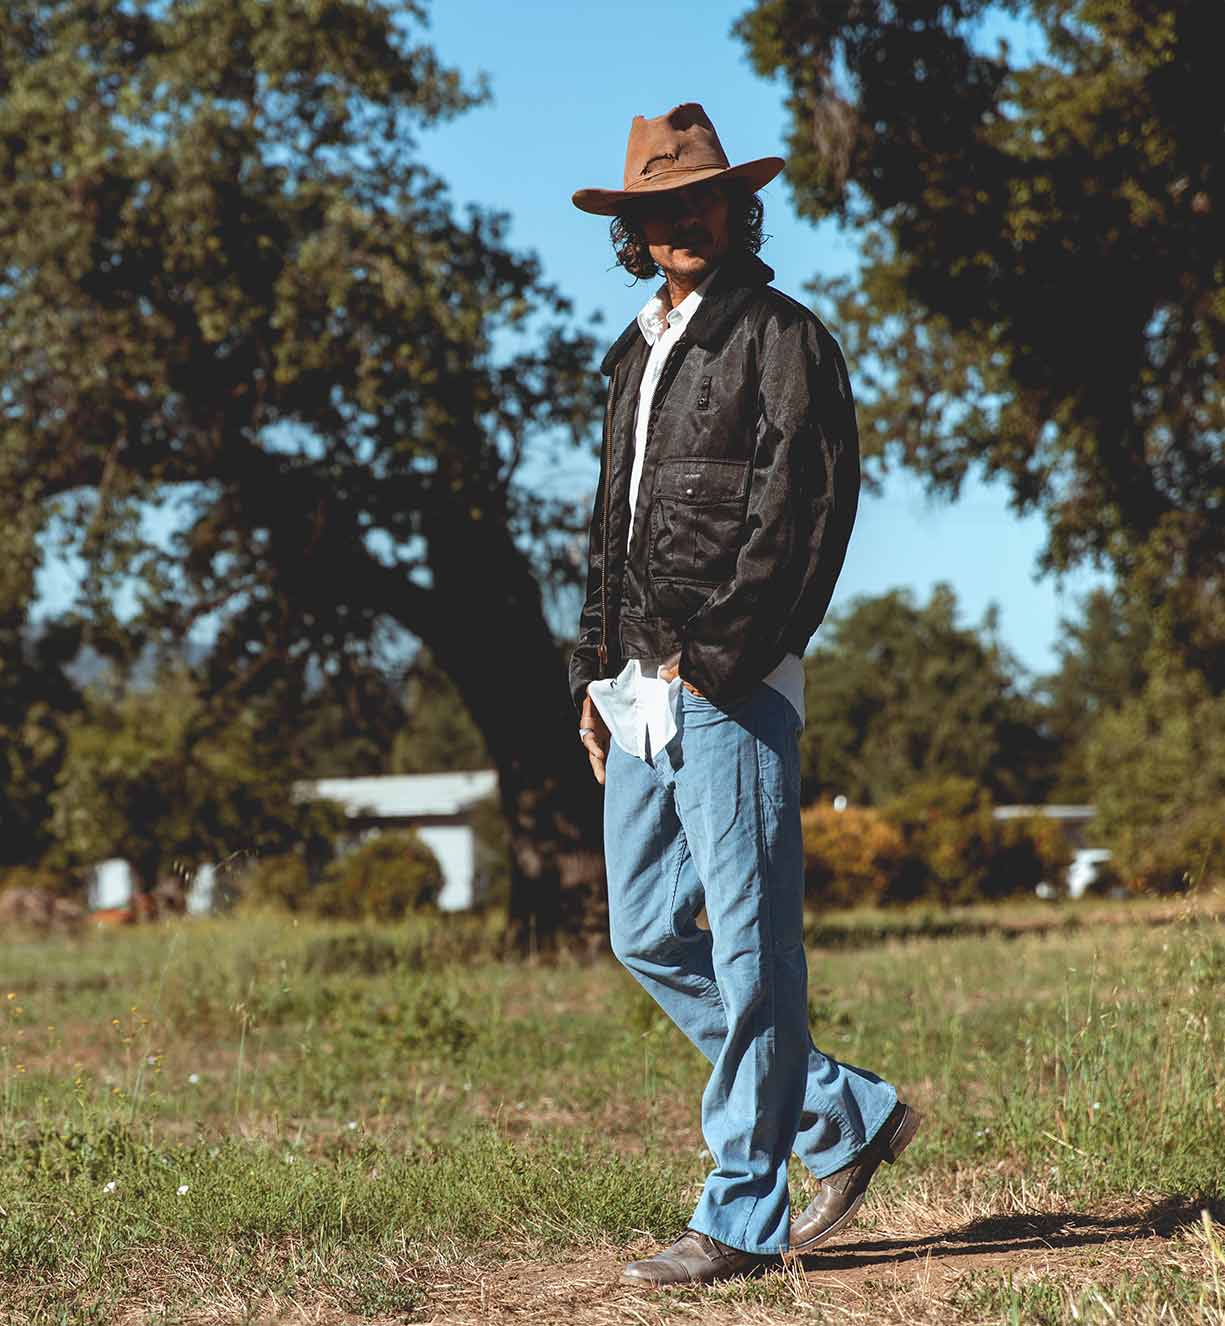 A man wearing a Bed Stu hat and jeans standing in a field.